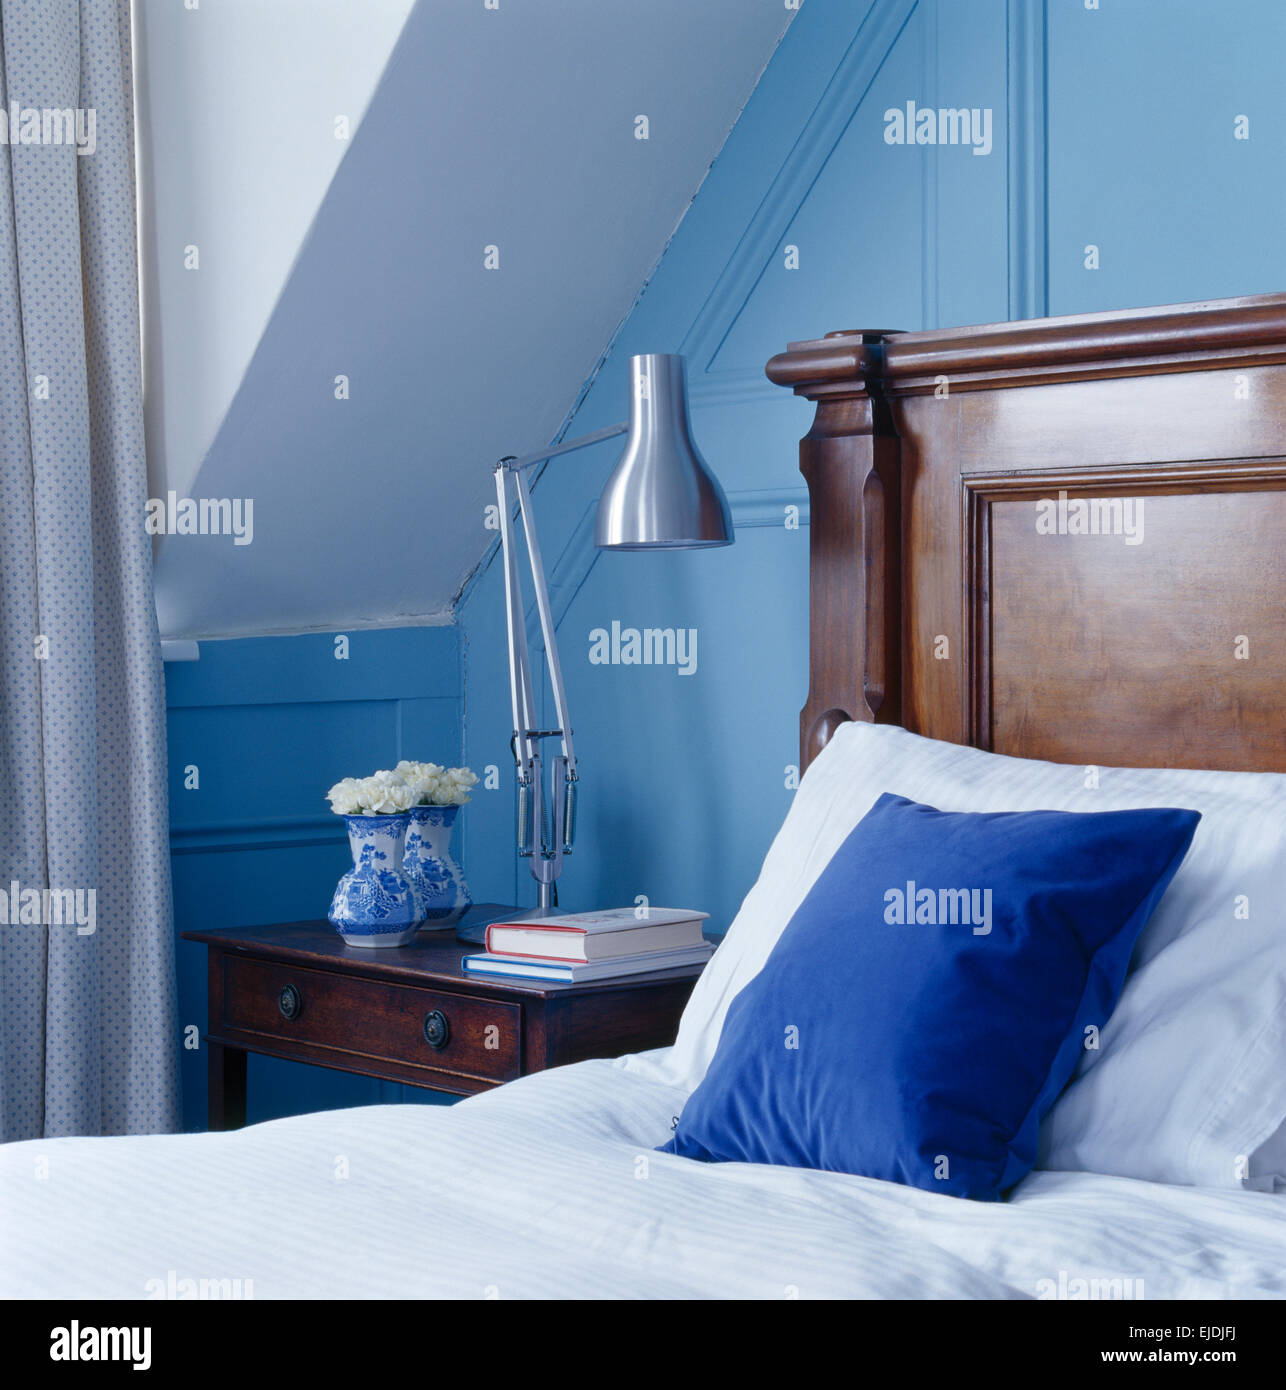 Chrome lamp on low table beside mahogany bed with bright blue cushion in pale blue bedroom Stock Photo